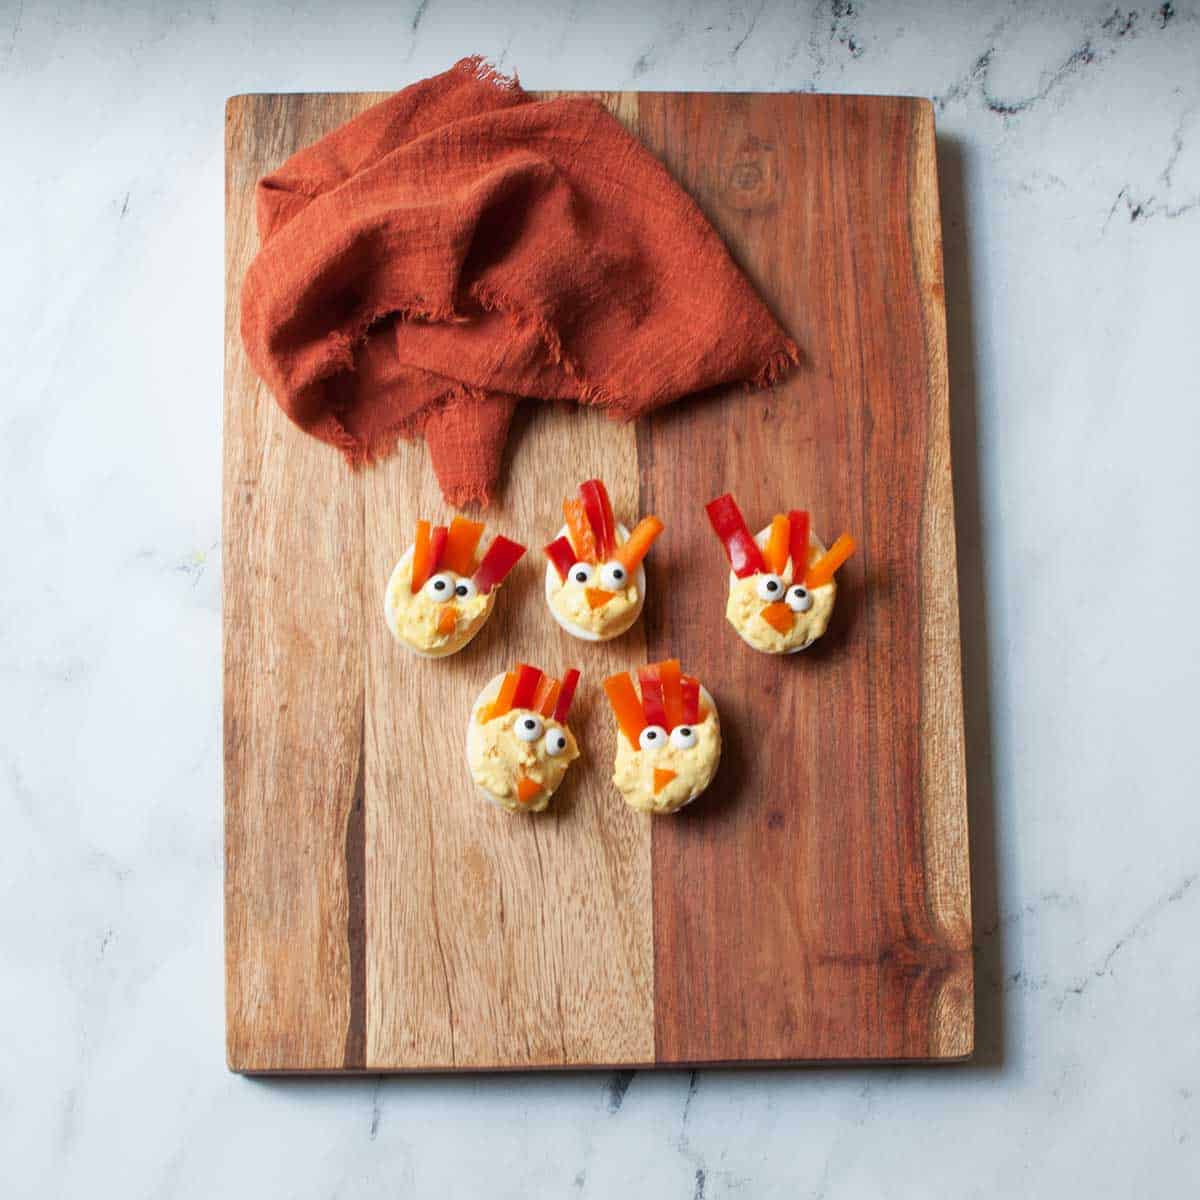 deviled eggs that have candy eyes and bell pepper strips arranged to make them look like turkeys on a wooden tray